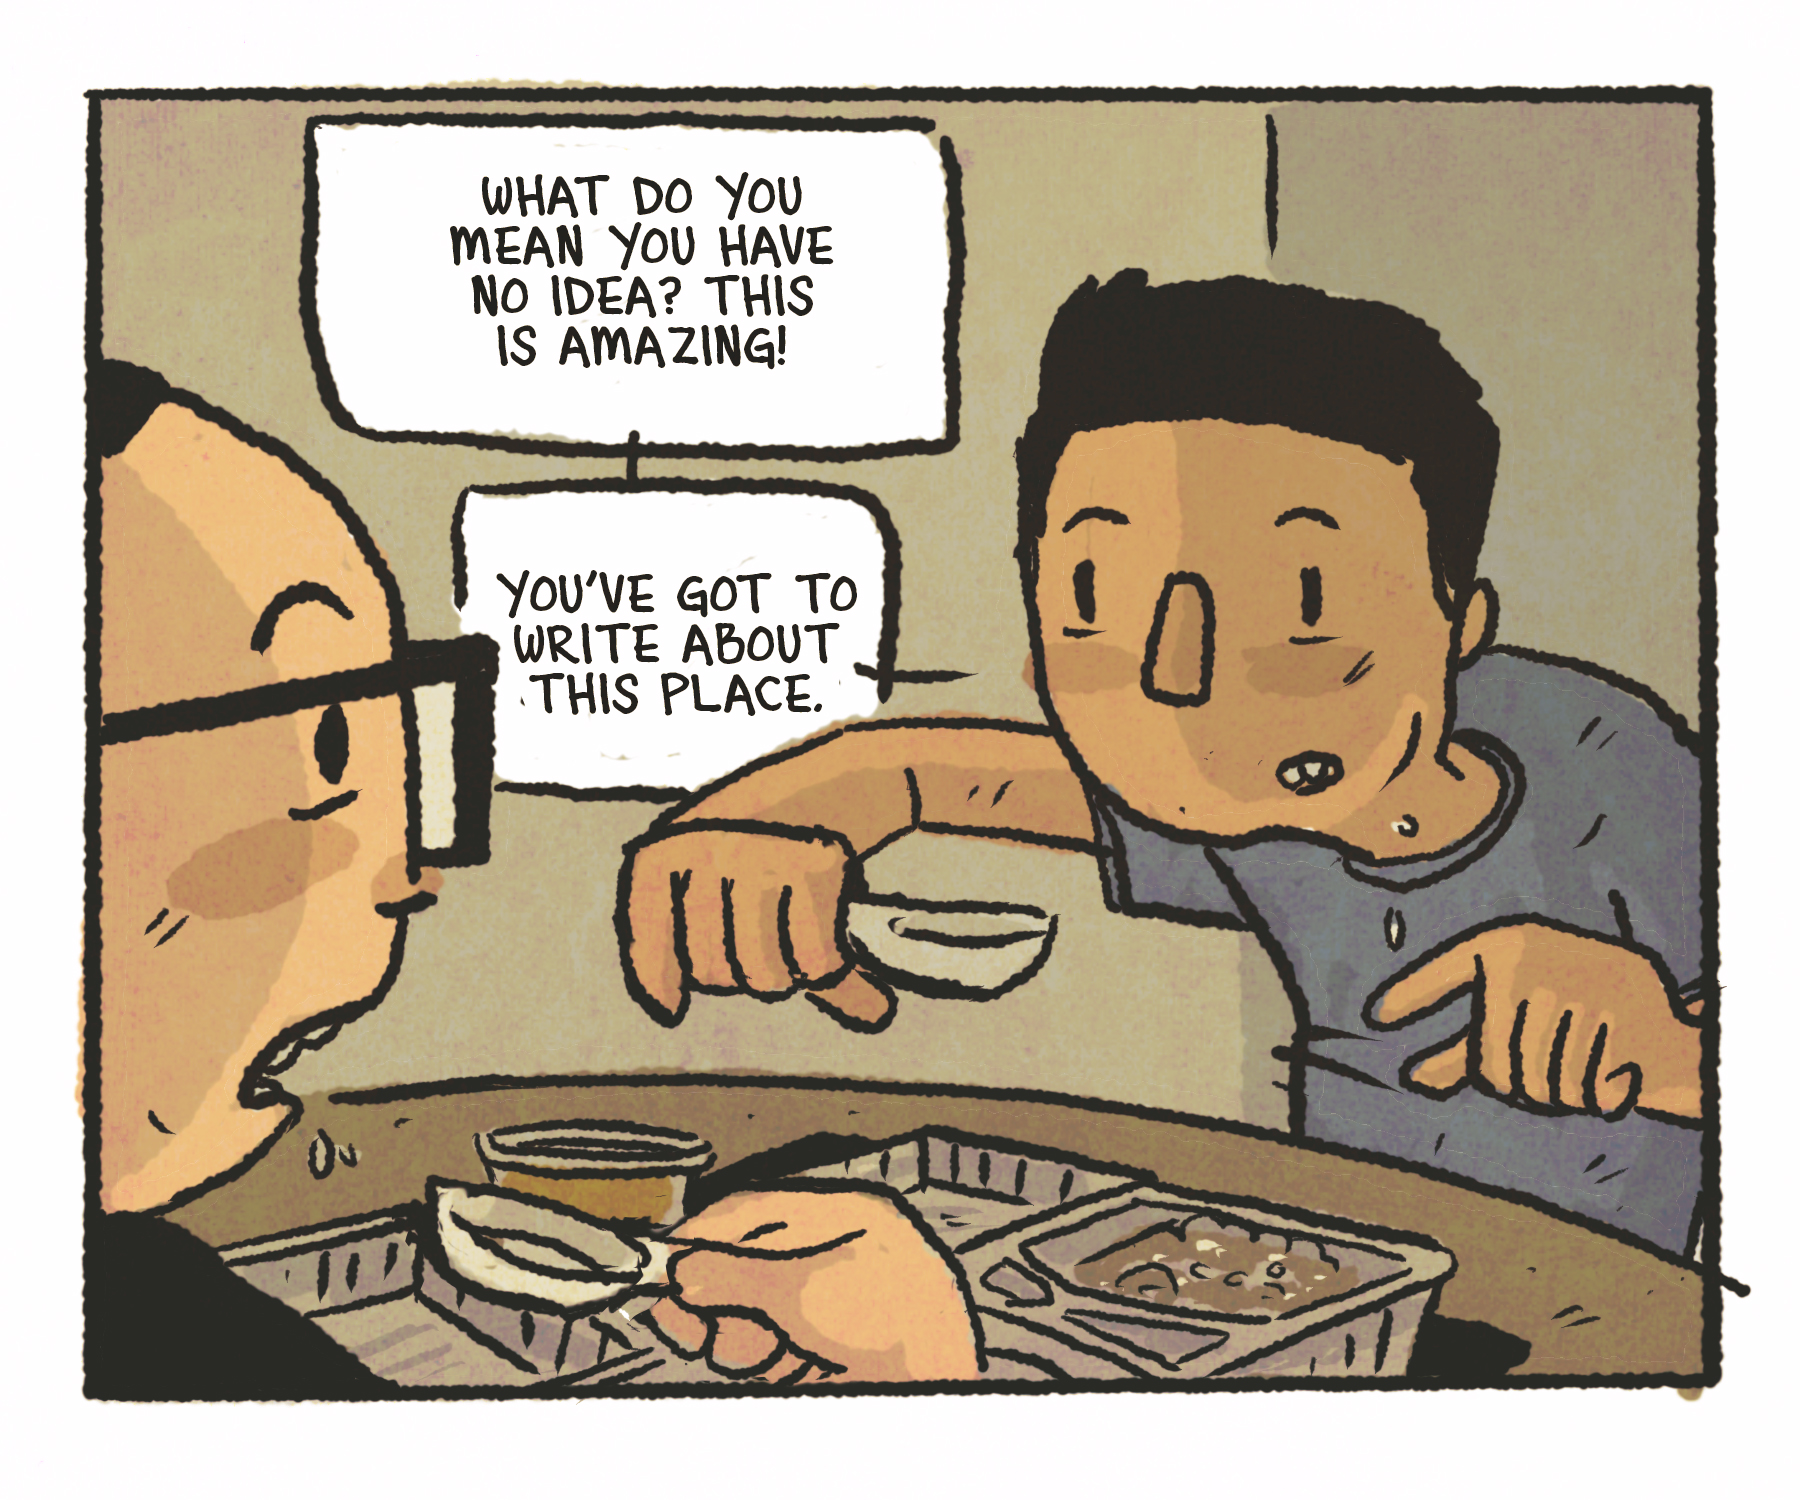 Comics panel: Two men converse at the table, spoons held aloft in mid-bite. The speech bubbles read, "What do you mean you have no idea? This is amazing!" "You've got to write about this place."